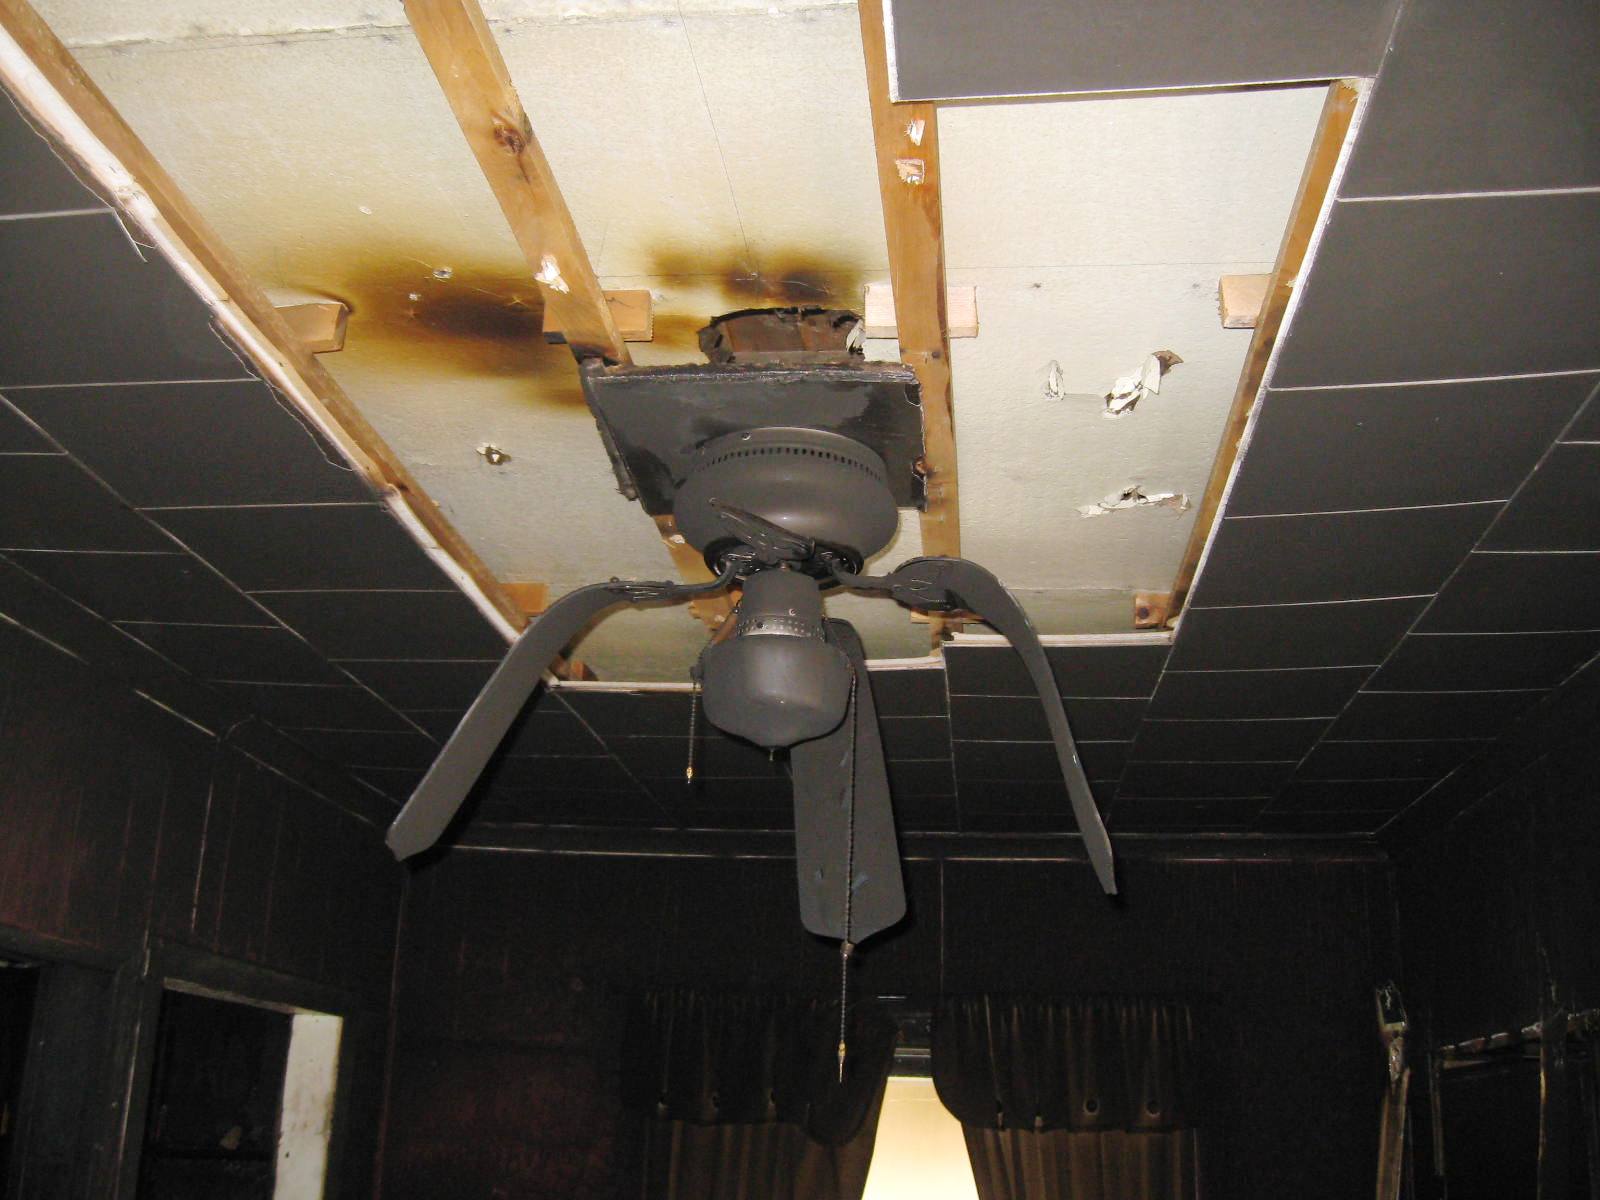 Ceiling fan drooping after being melted by a fire, smoke and fire damage throughout the ceiling.